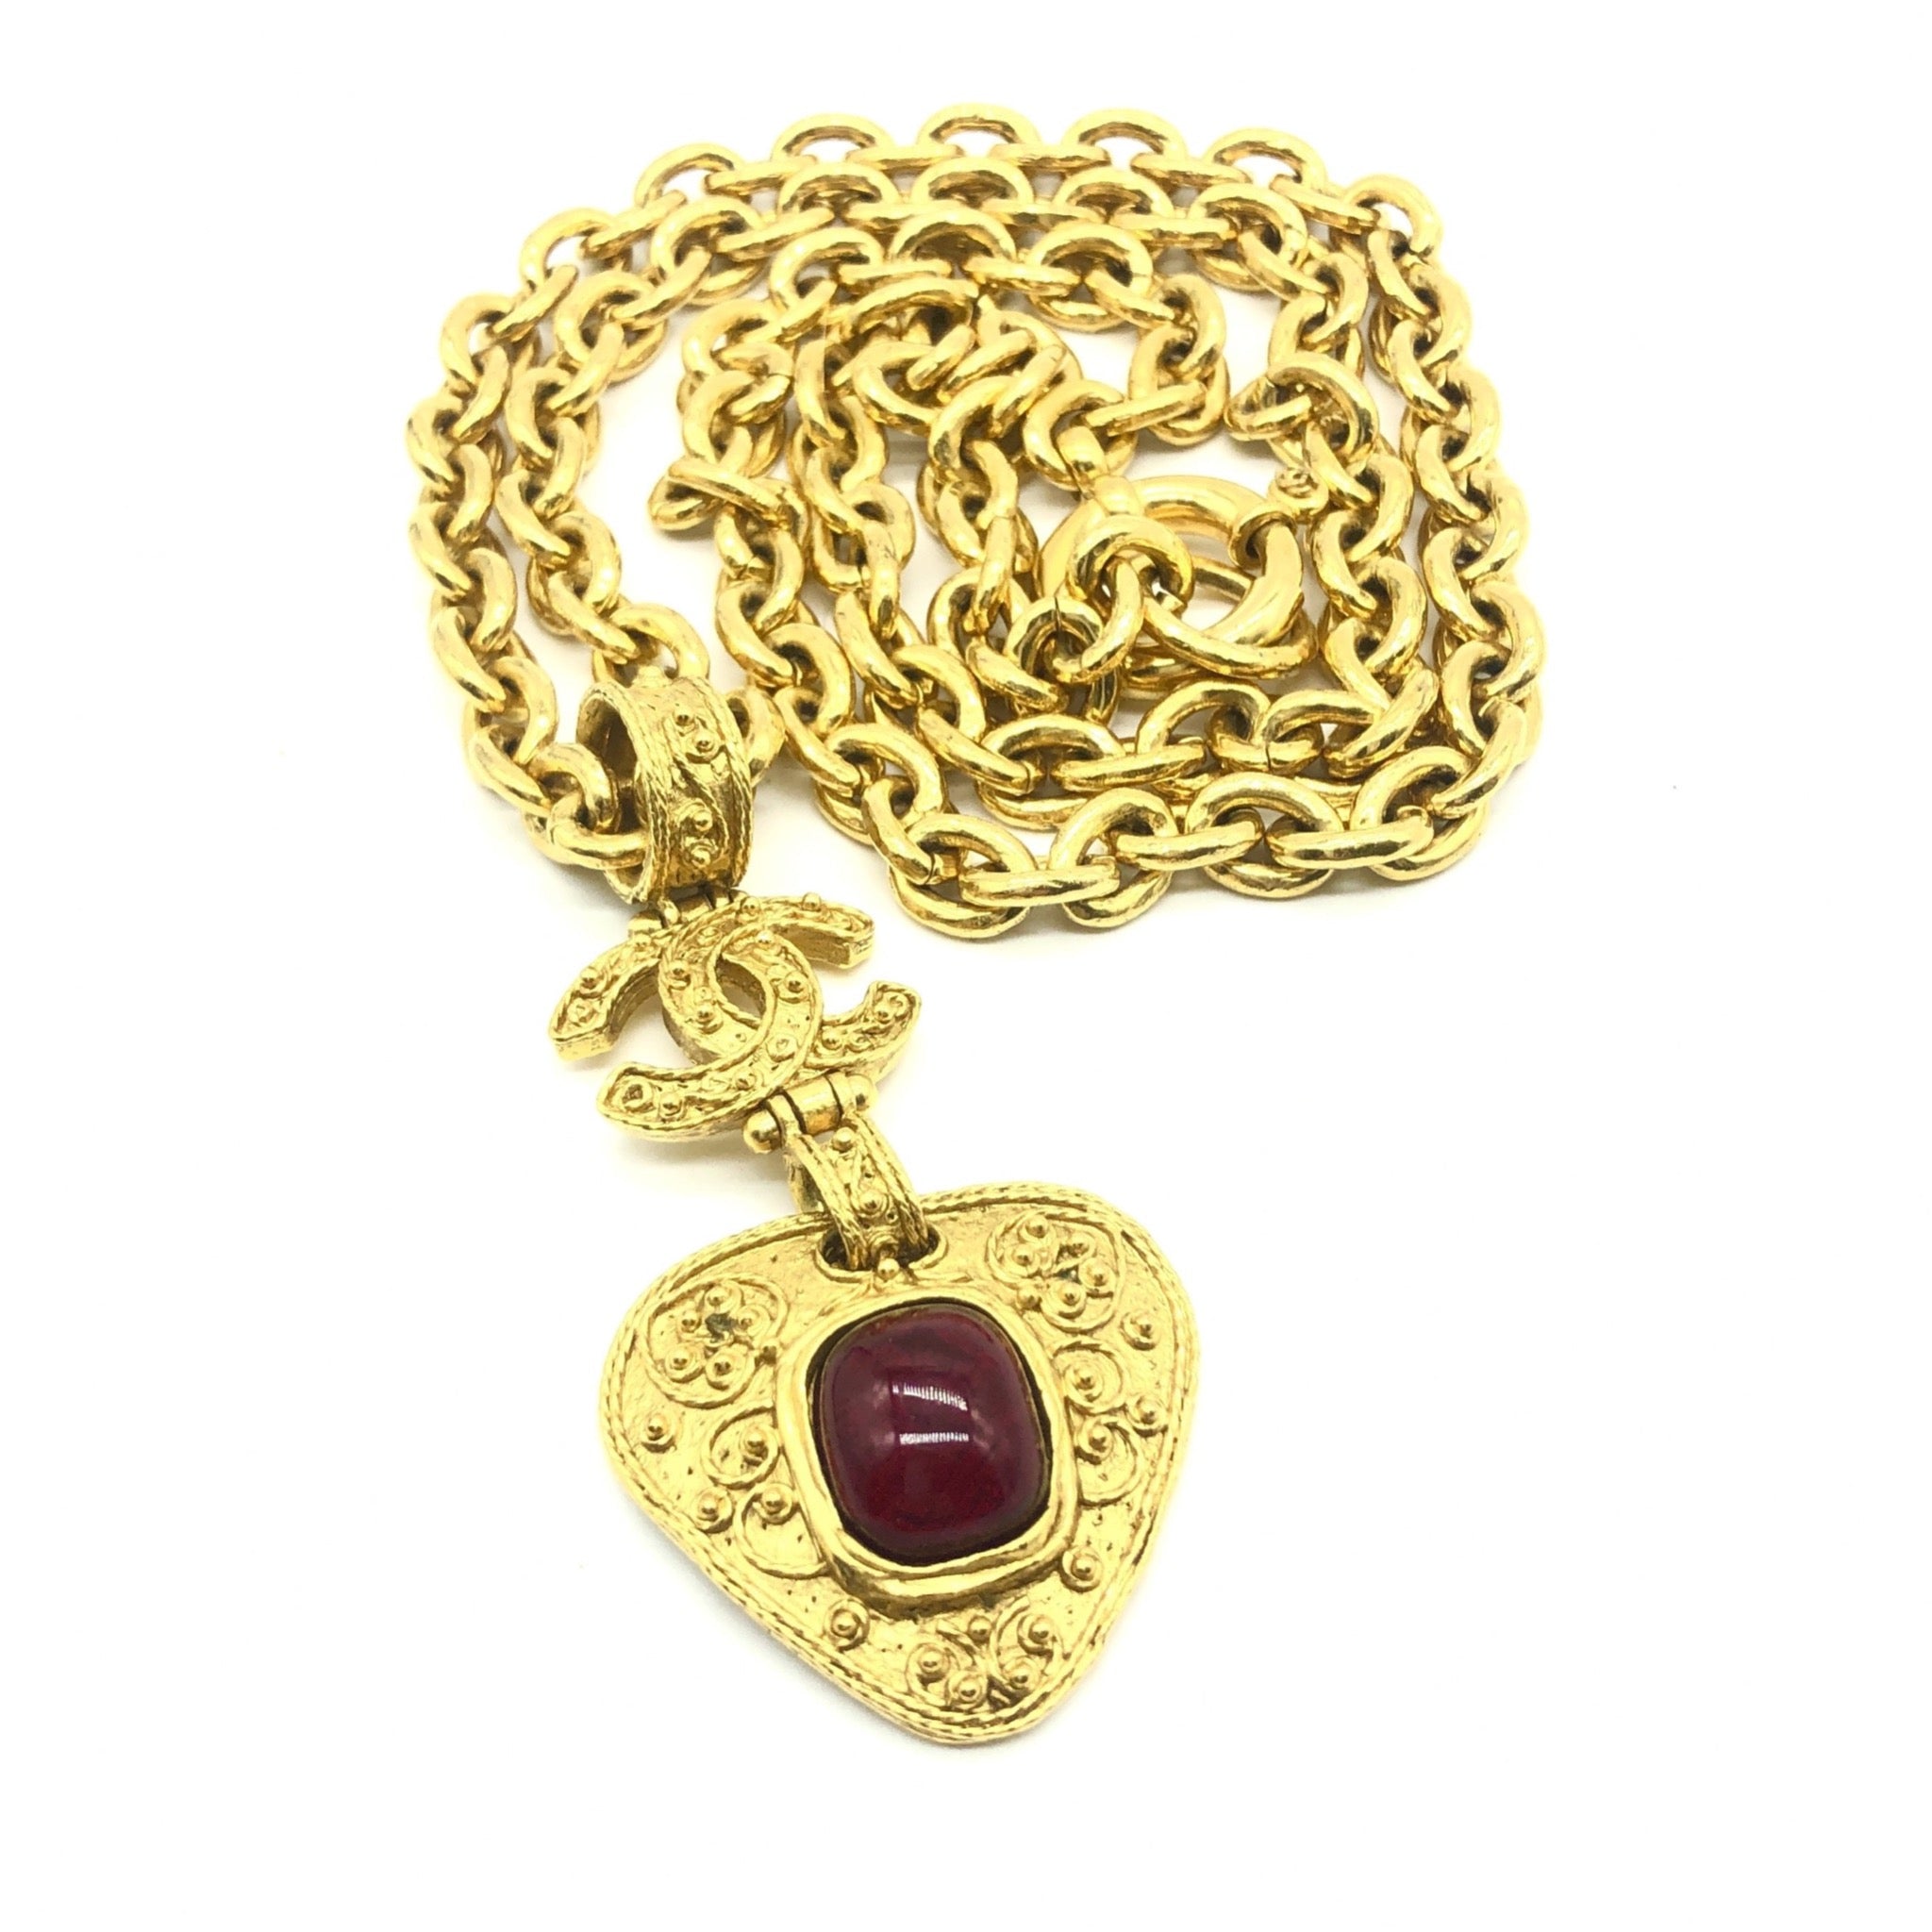 CHANEL, Jewelry, Vintage Chanel Logo Heart Pendant Necklace 8 14k Gold  Plated Box Chain